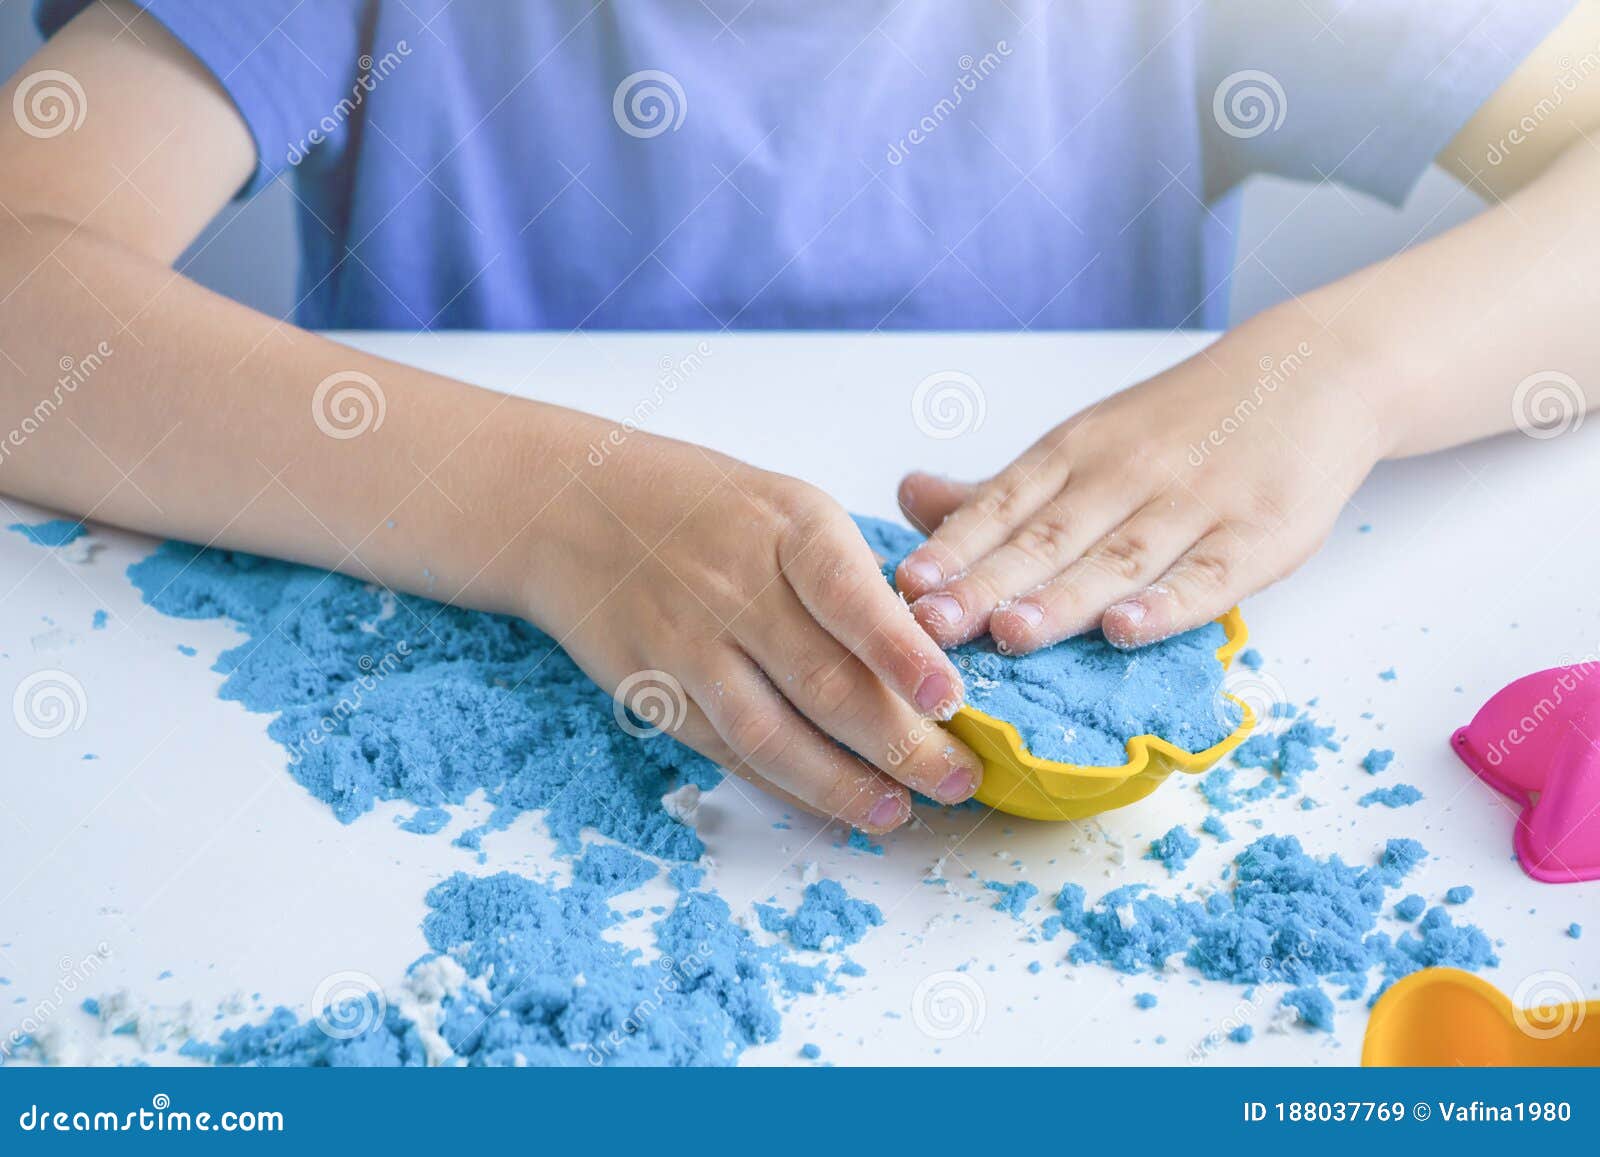 kids creativity. kinetic sand games for child development at home. sand therapy. children`s hands making moldes. selective focus,